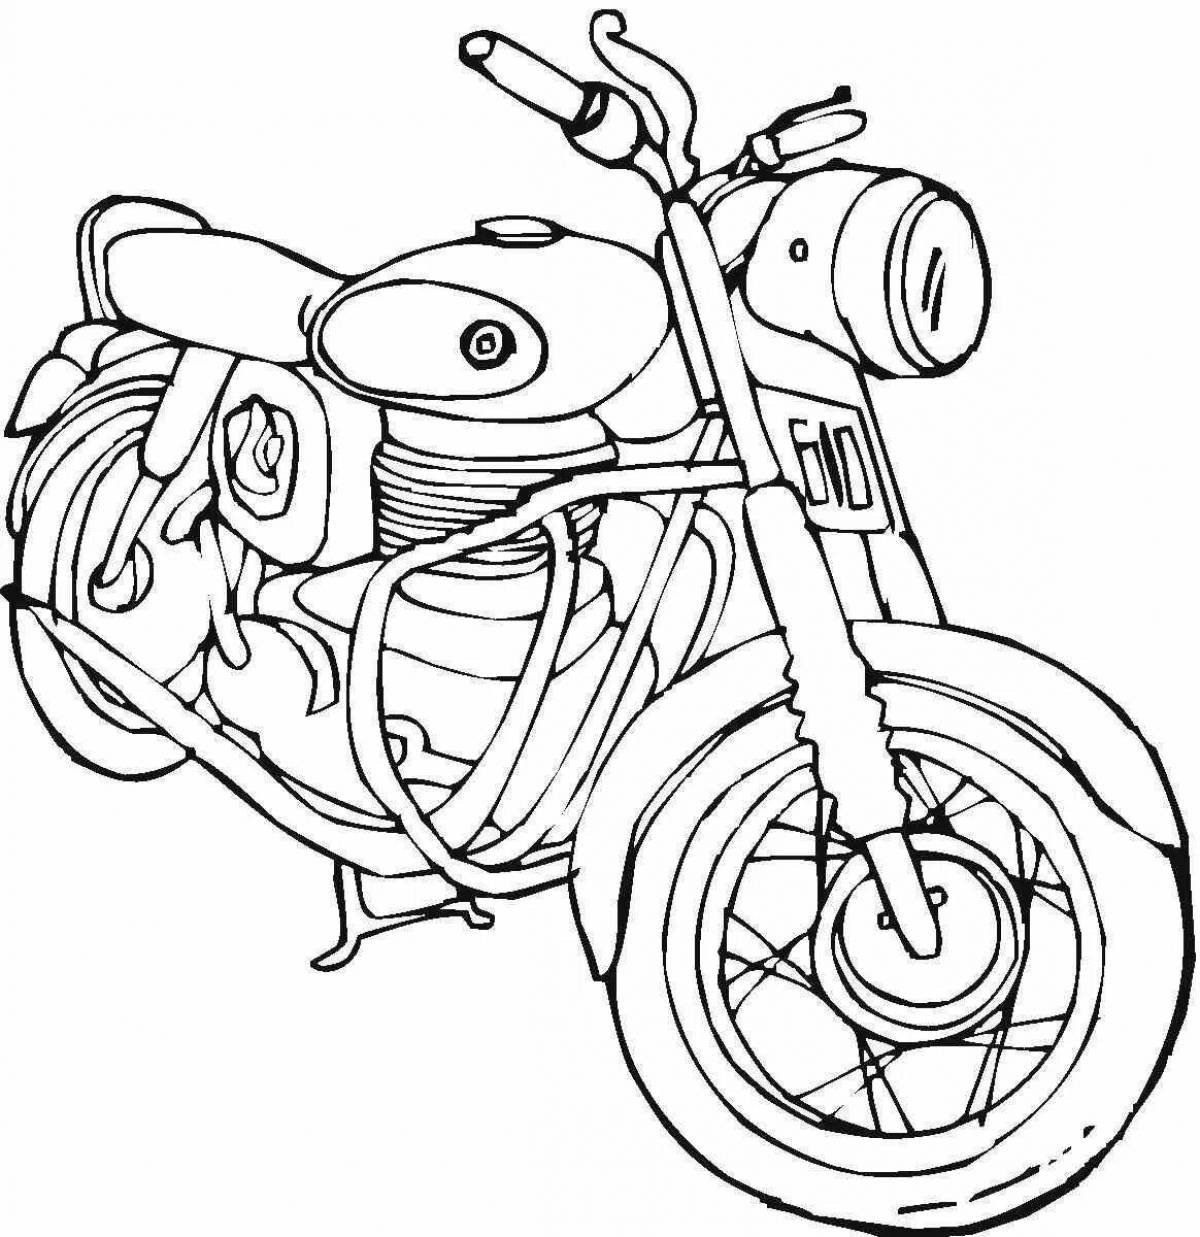 Amazing coloring of motorcycles for kids